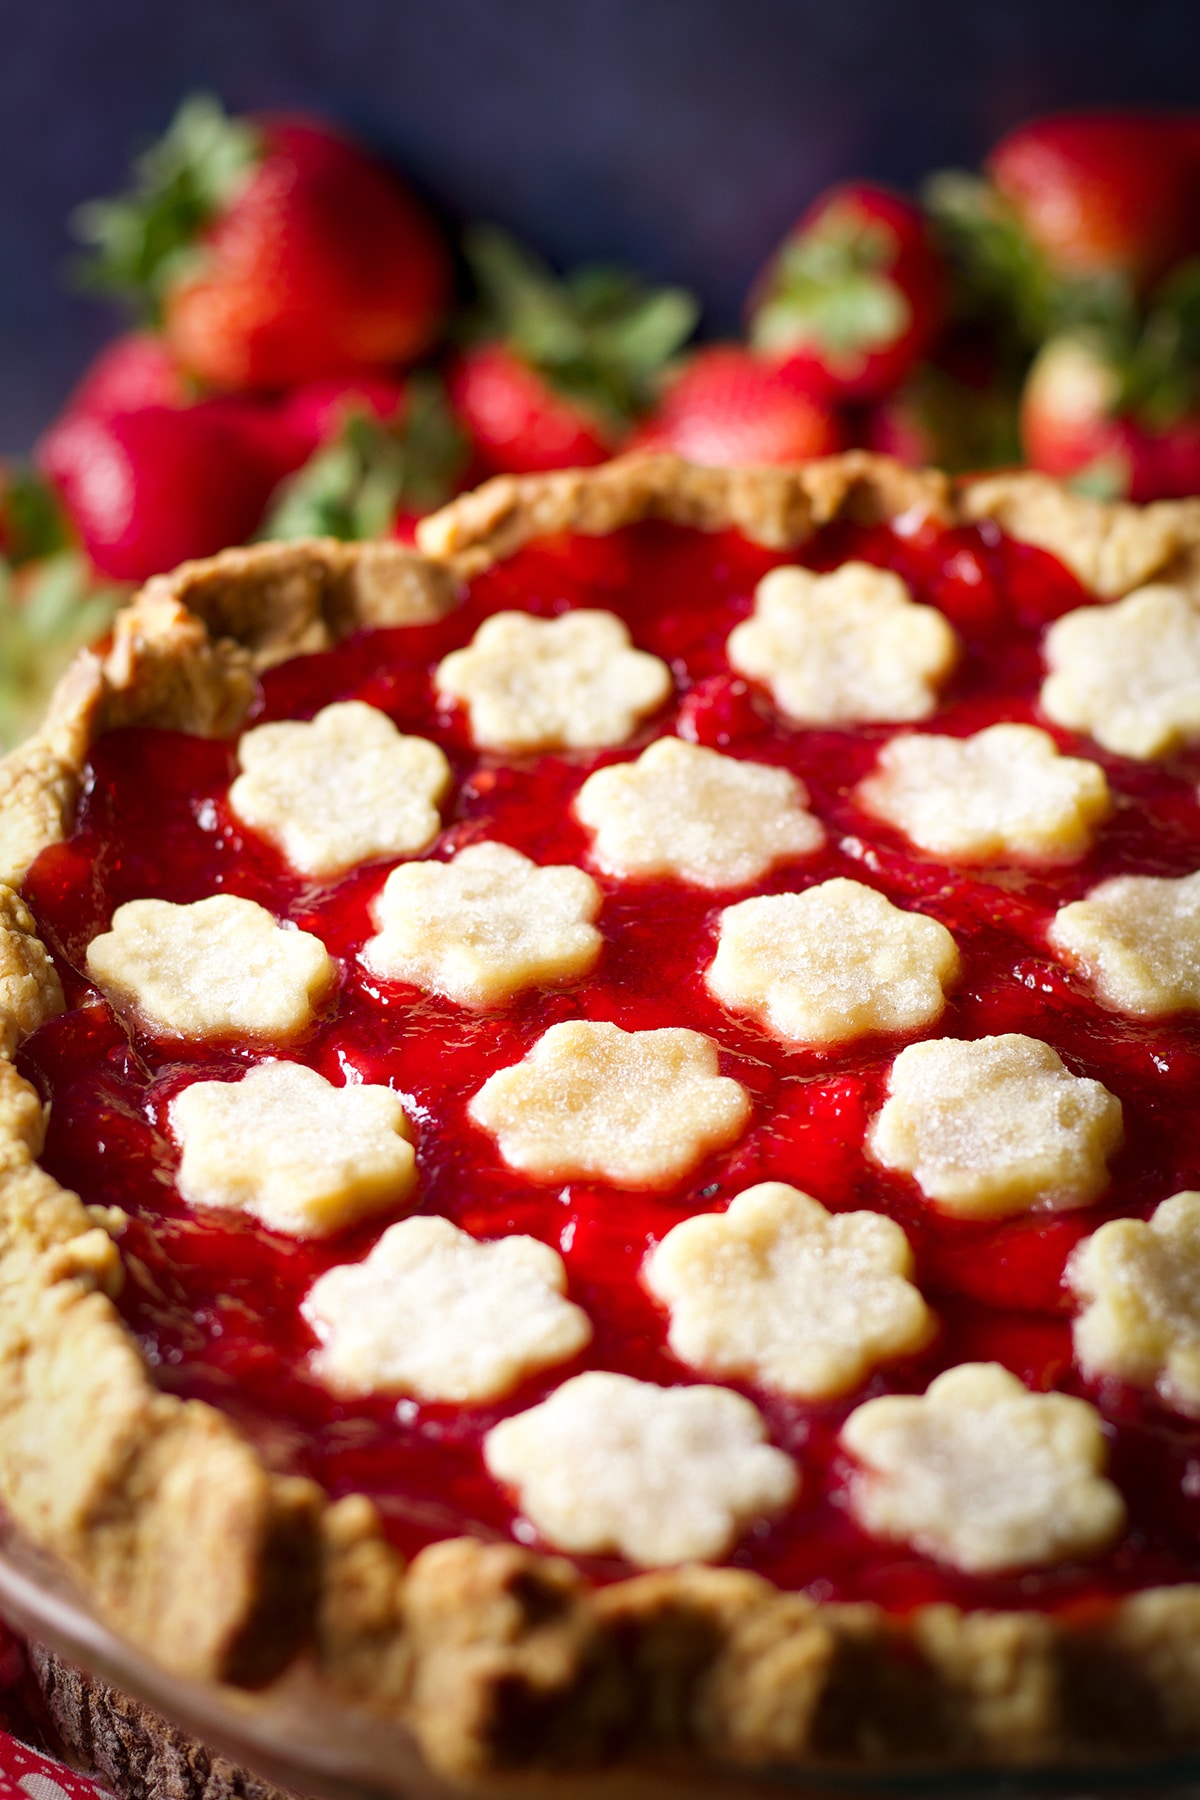 A freshly baked strawberry cream pie cooling on a pie rack with fresh strawberries in the background.